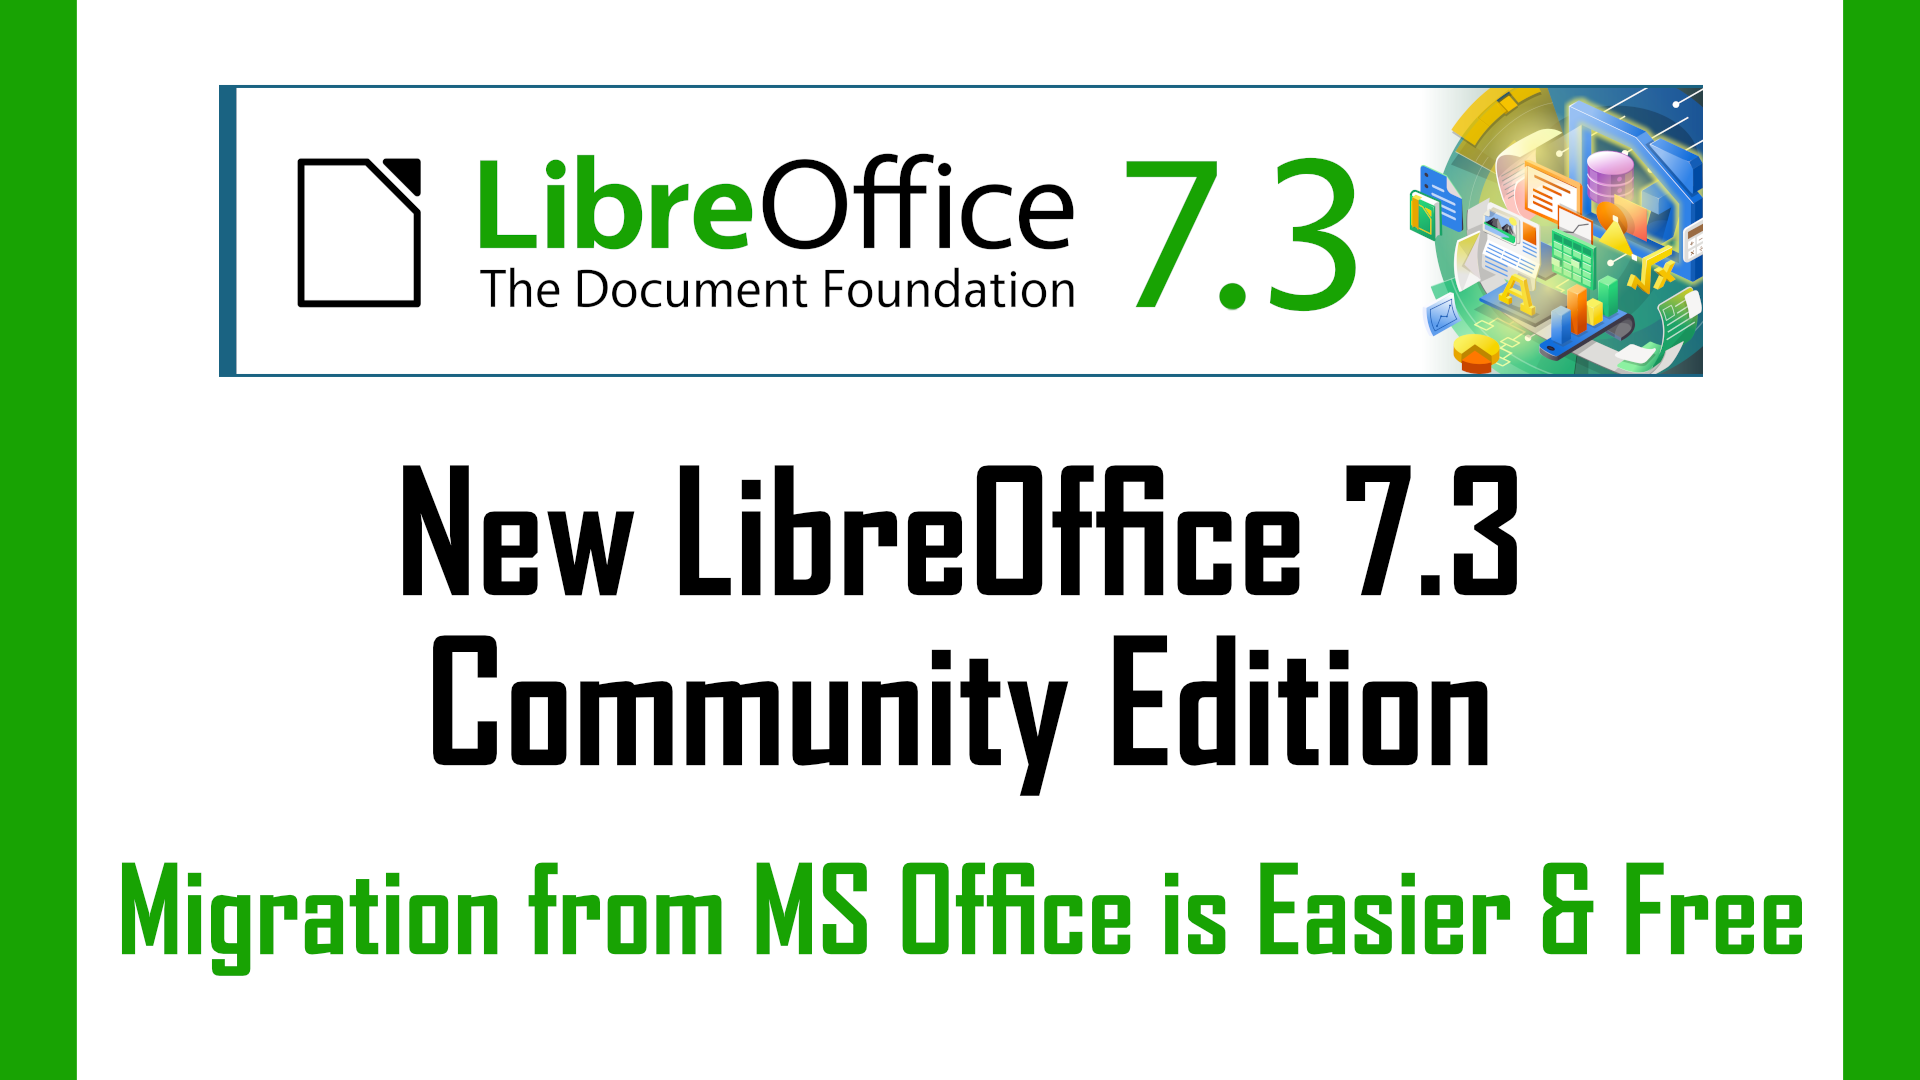 New LibreOffice 7.3: Migration from MS Office is Easier & Free